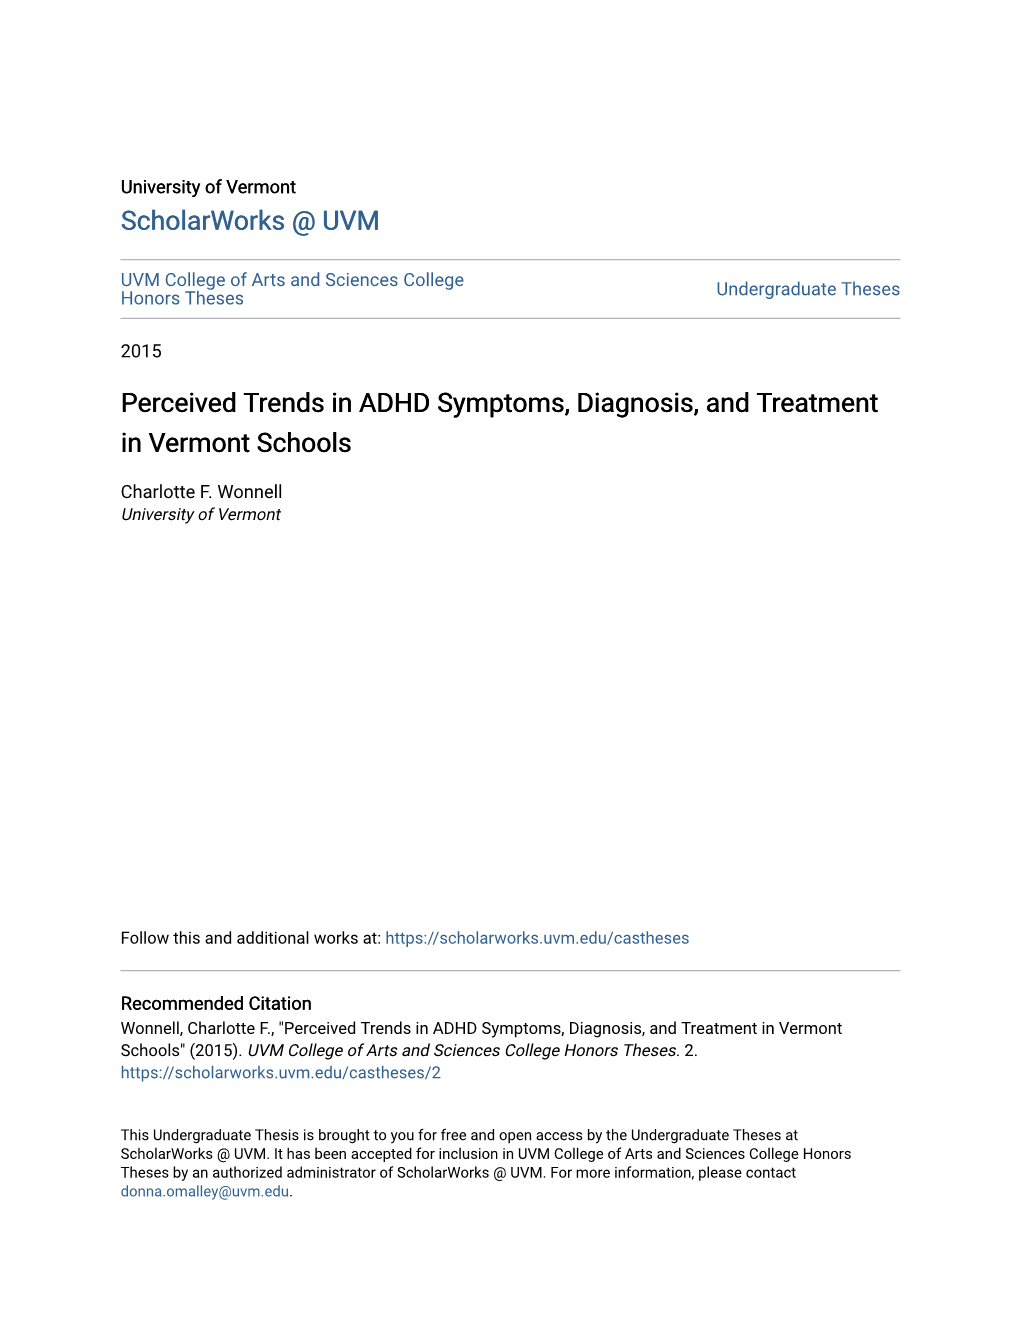 Perceived Trends in ADHD Symptoms, Diagnosis, and Treatment in Vermont Schools